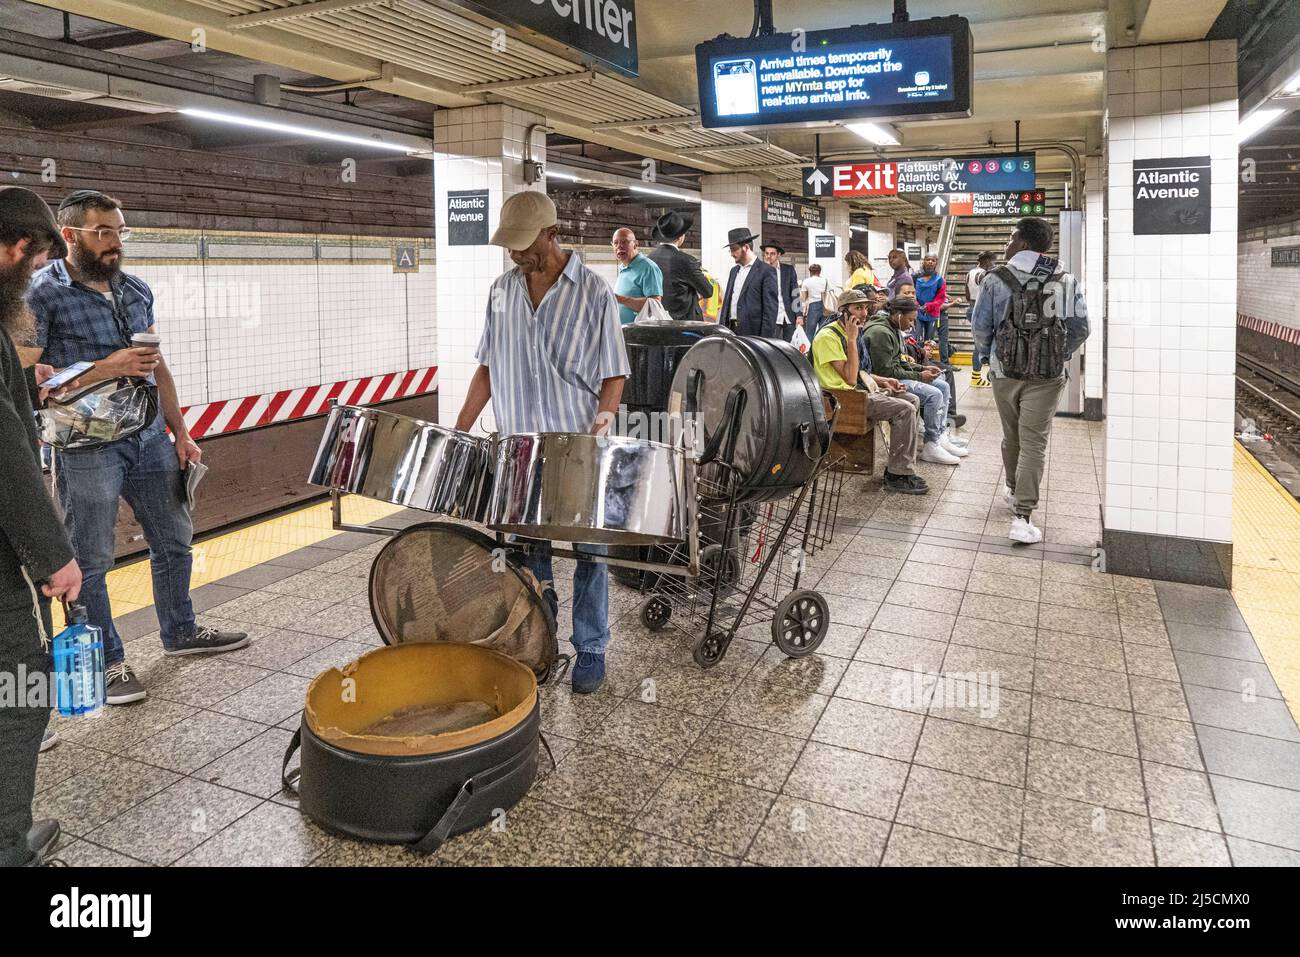 USA, New York, Sept. 20, 2019 Steel drum musician at the Atlantic Avenue subway station in Brooklyn on Sept. 20, 2019 The instrument was invented in Trinidad in the 1930s and is the national instrument there. [automated translation] Stock Photo